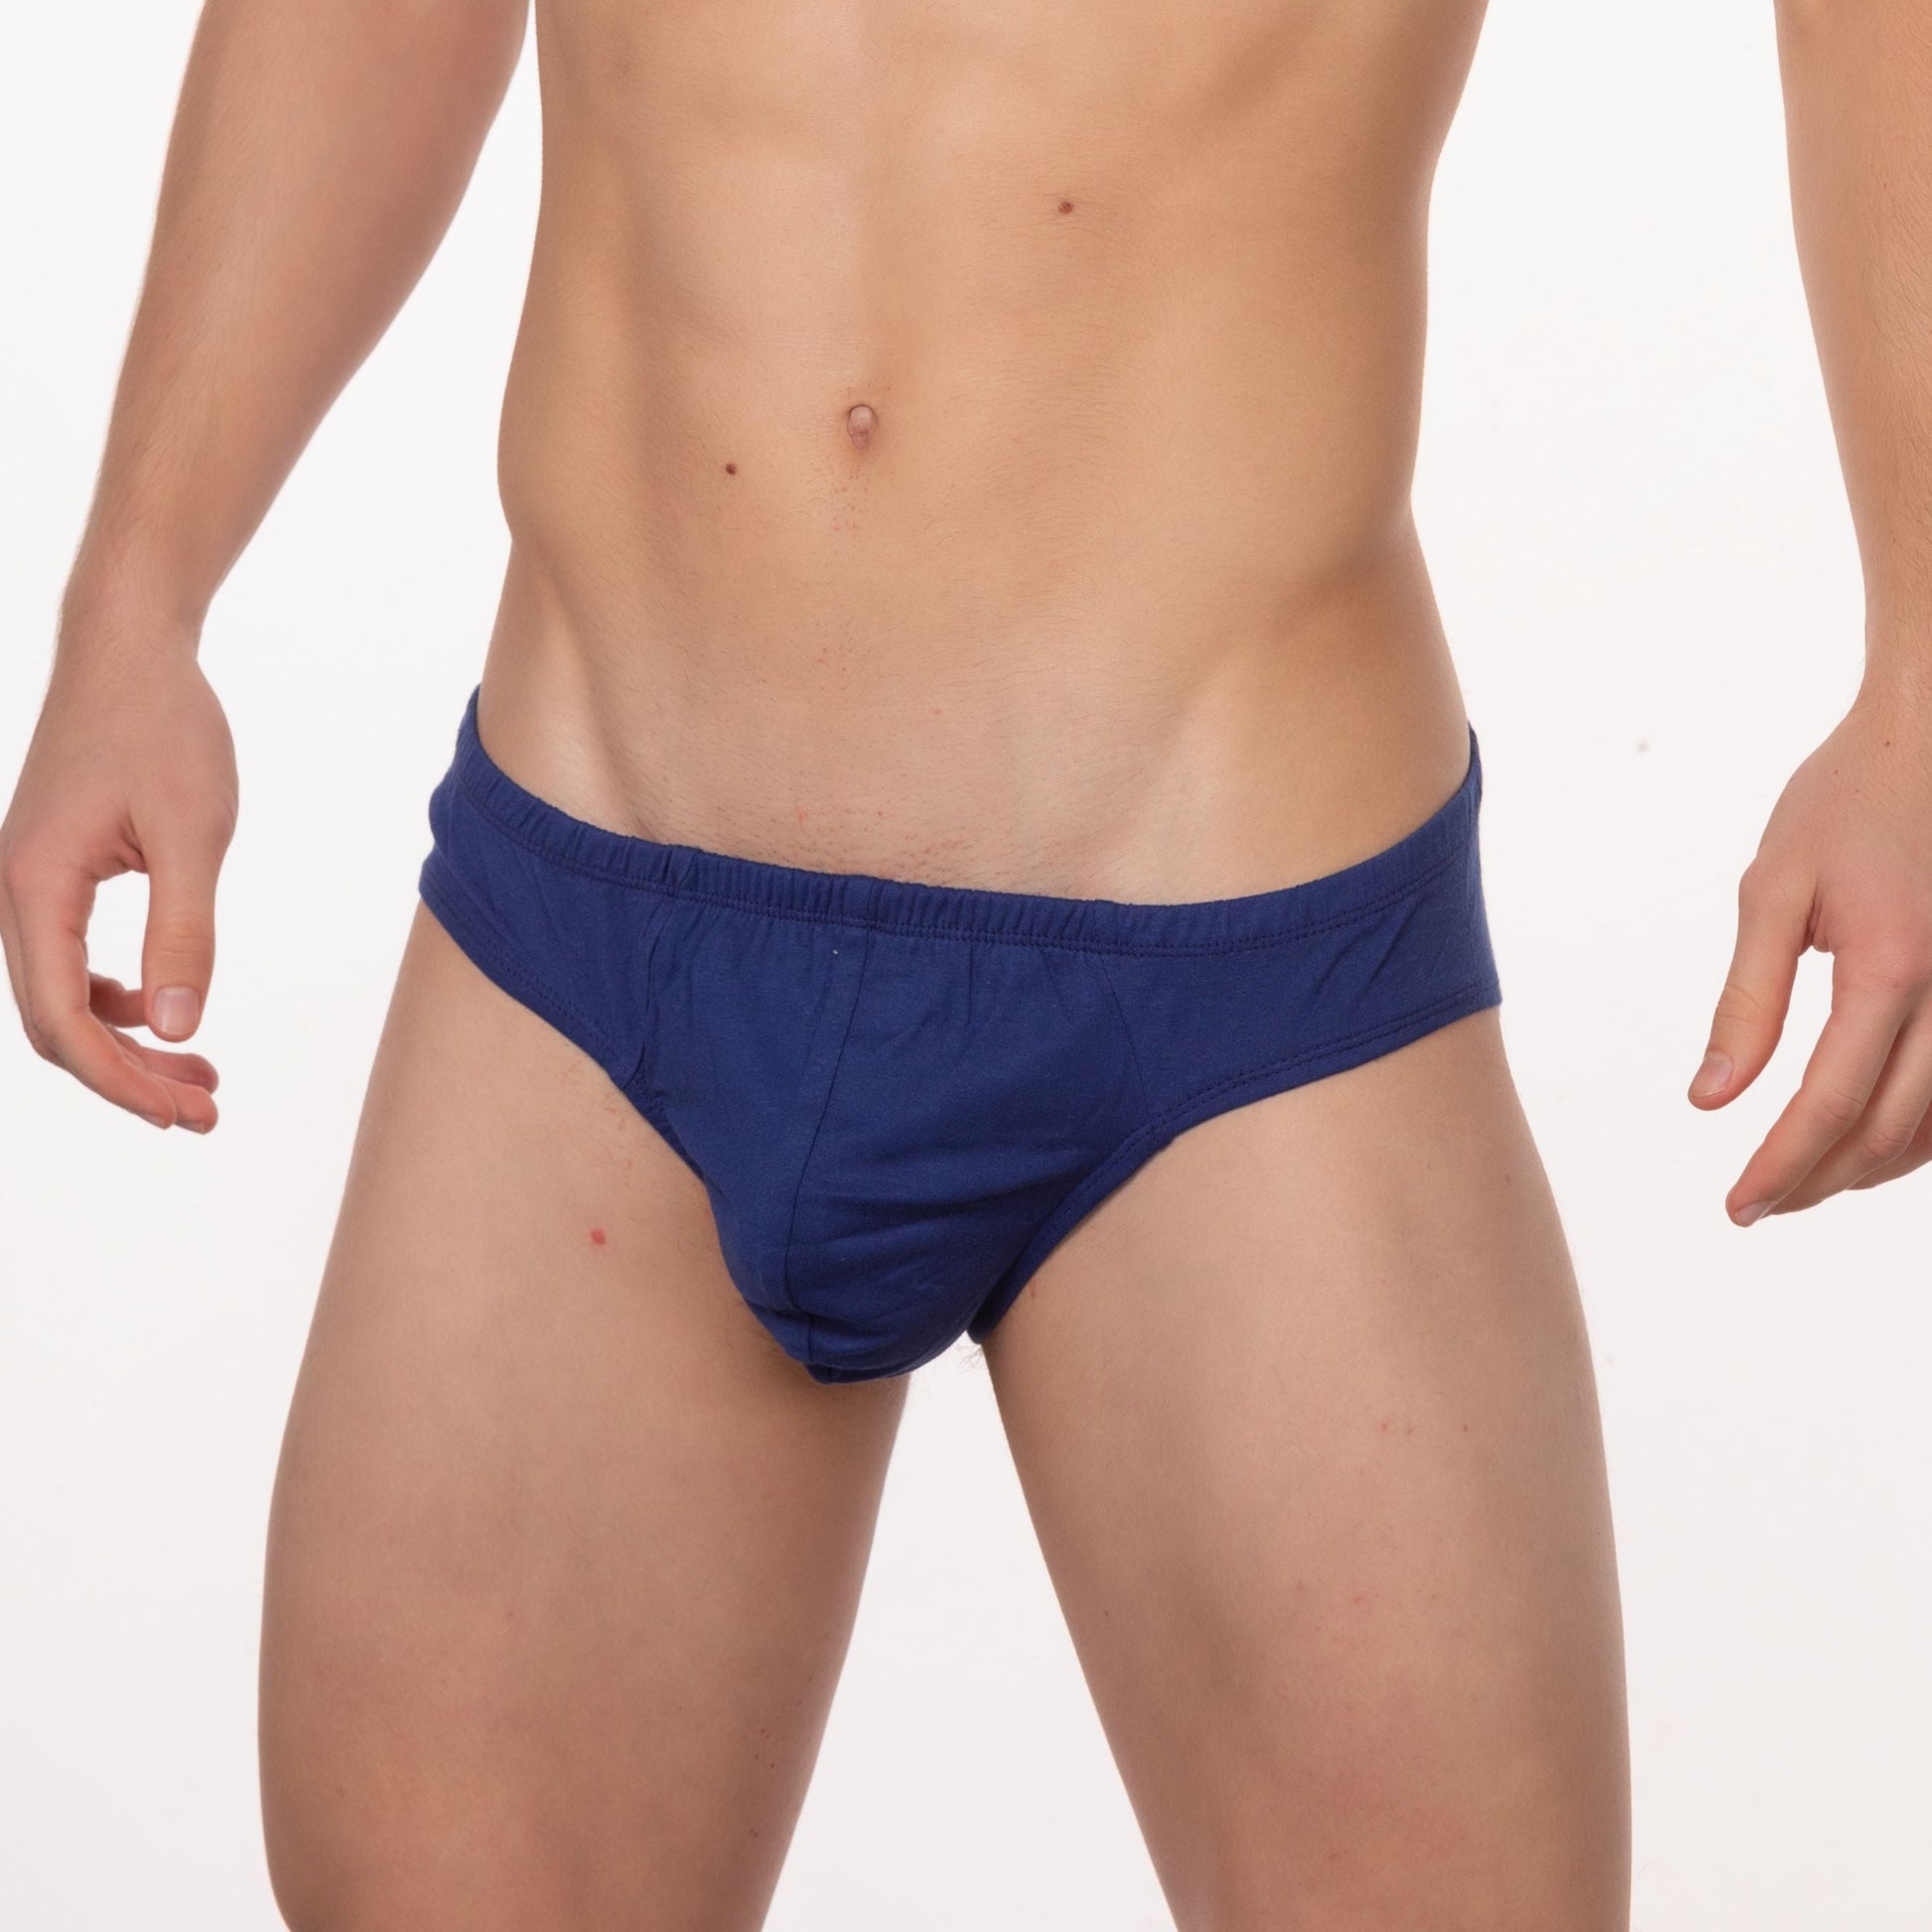 Contour French Brief in Navy - Front View 